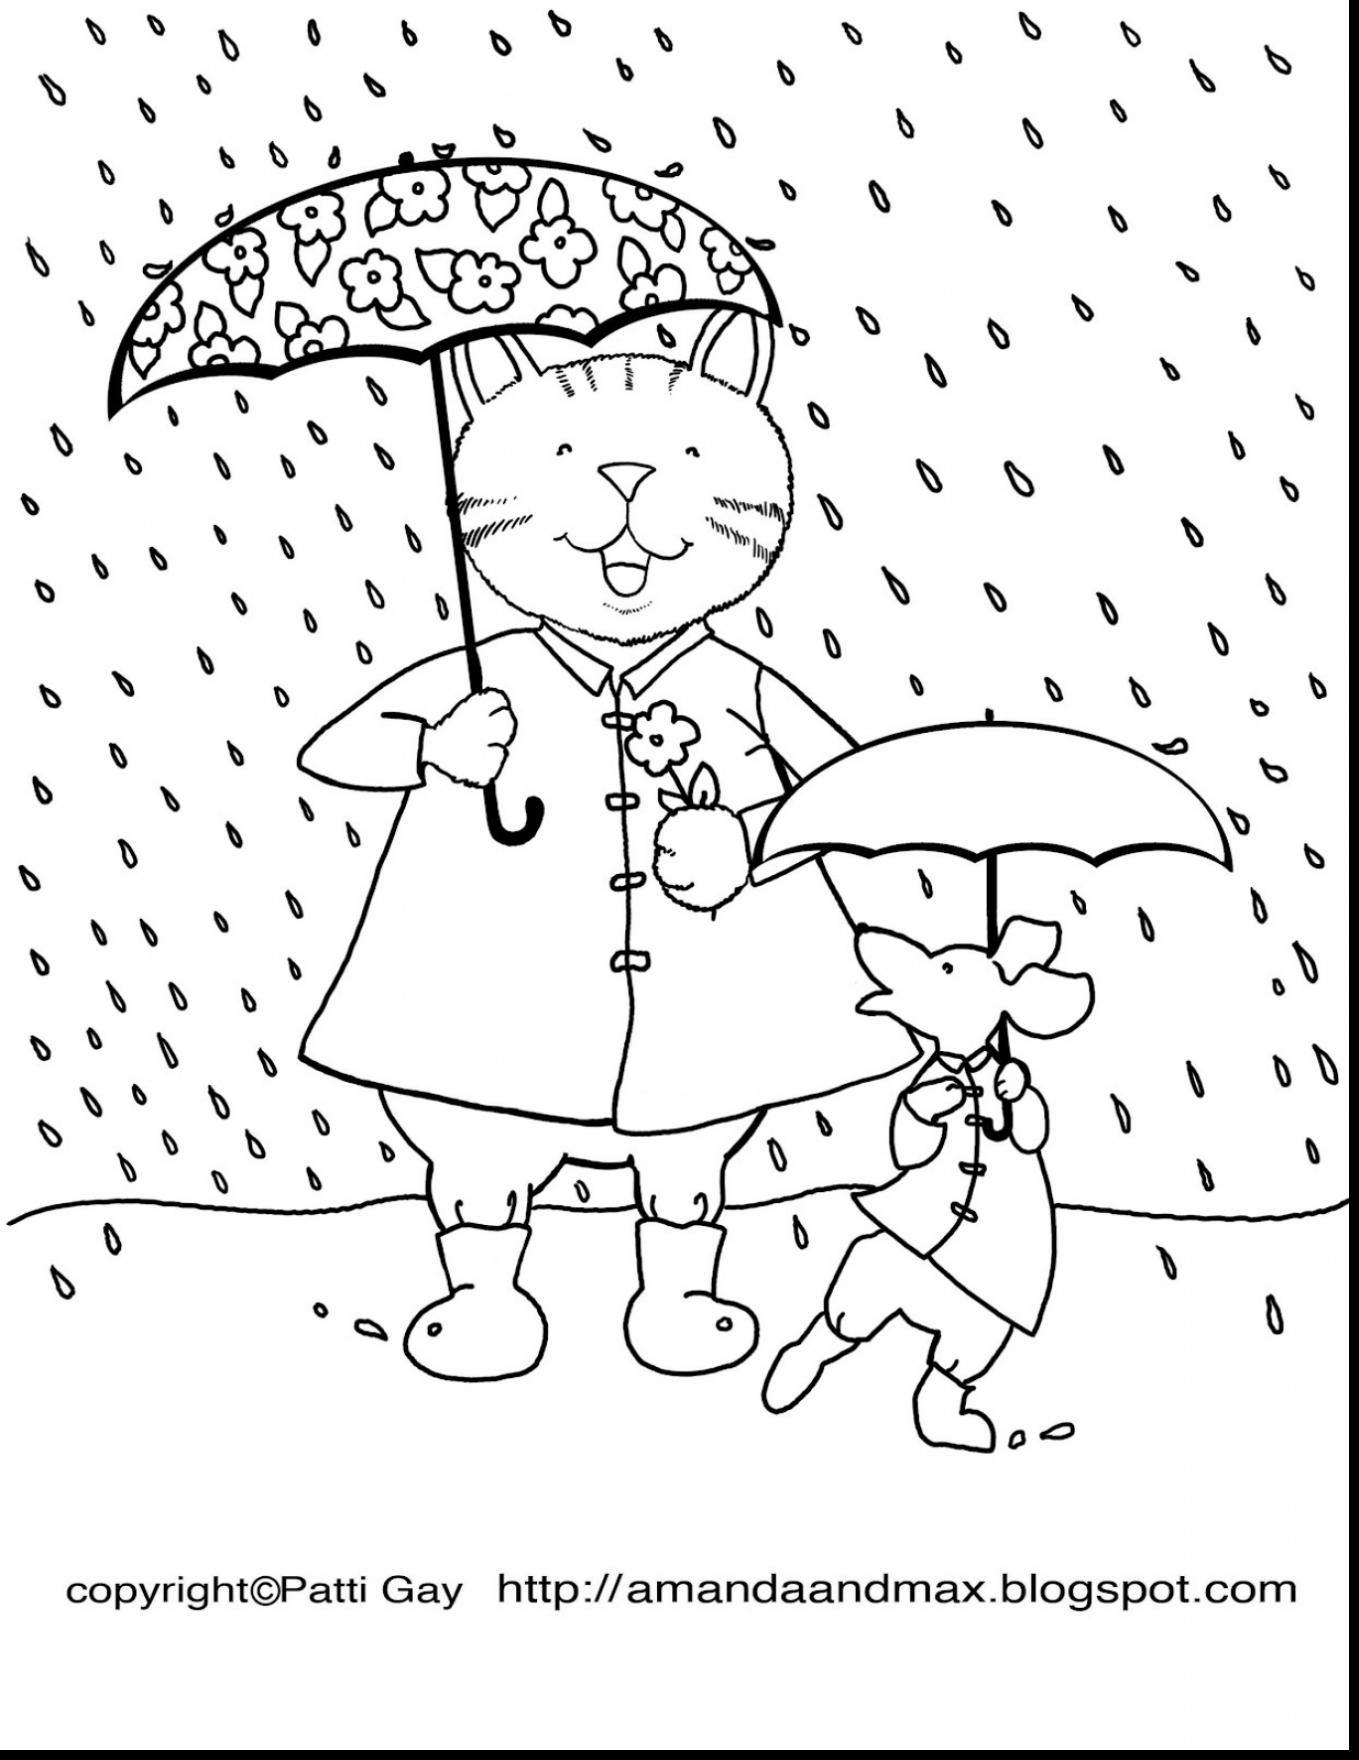 Rainy Weather Coloring Pages at GetDrawings | Free download